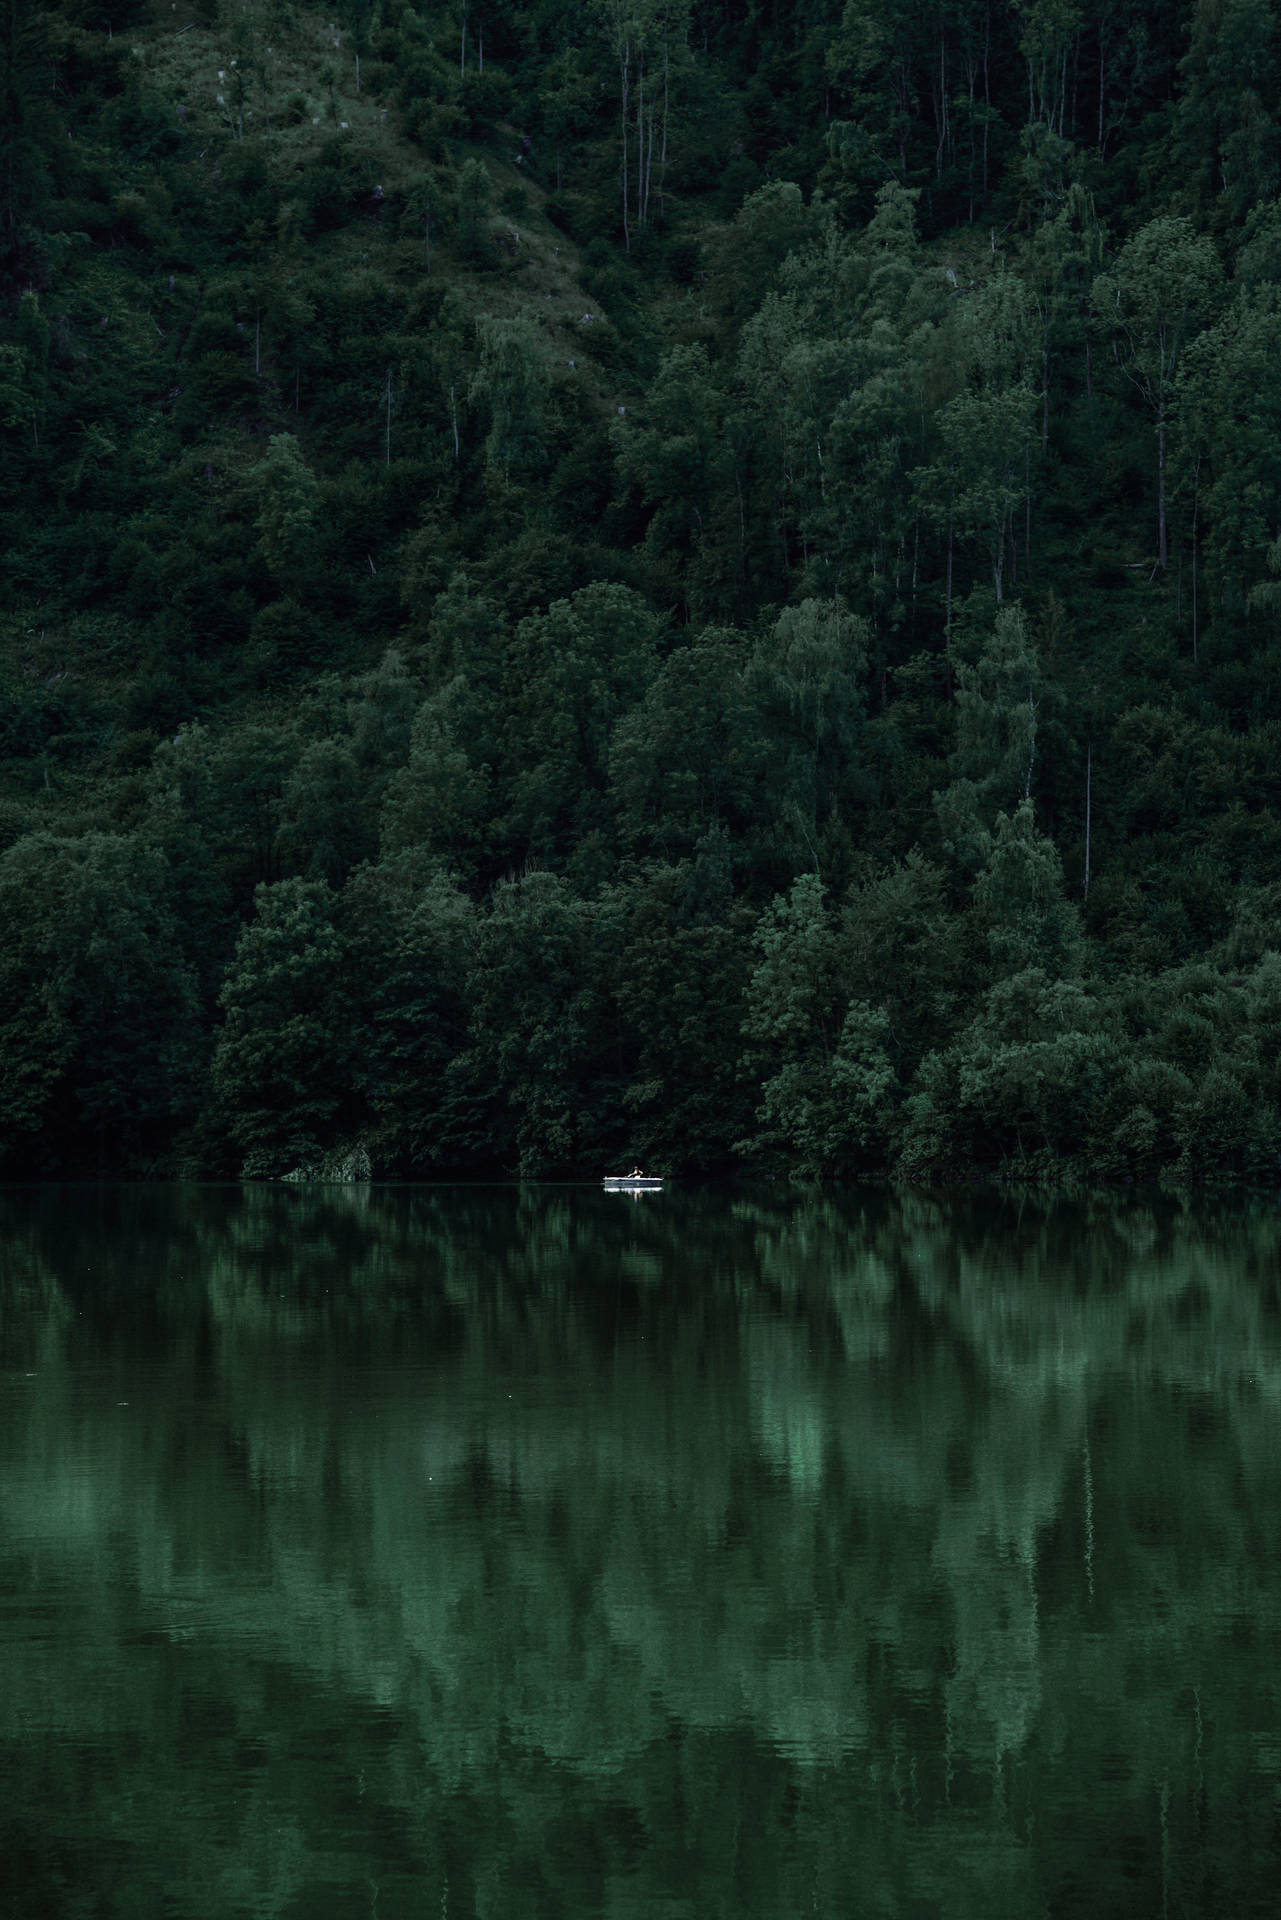 Hd Forest With White Boat